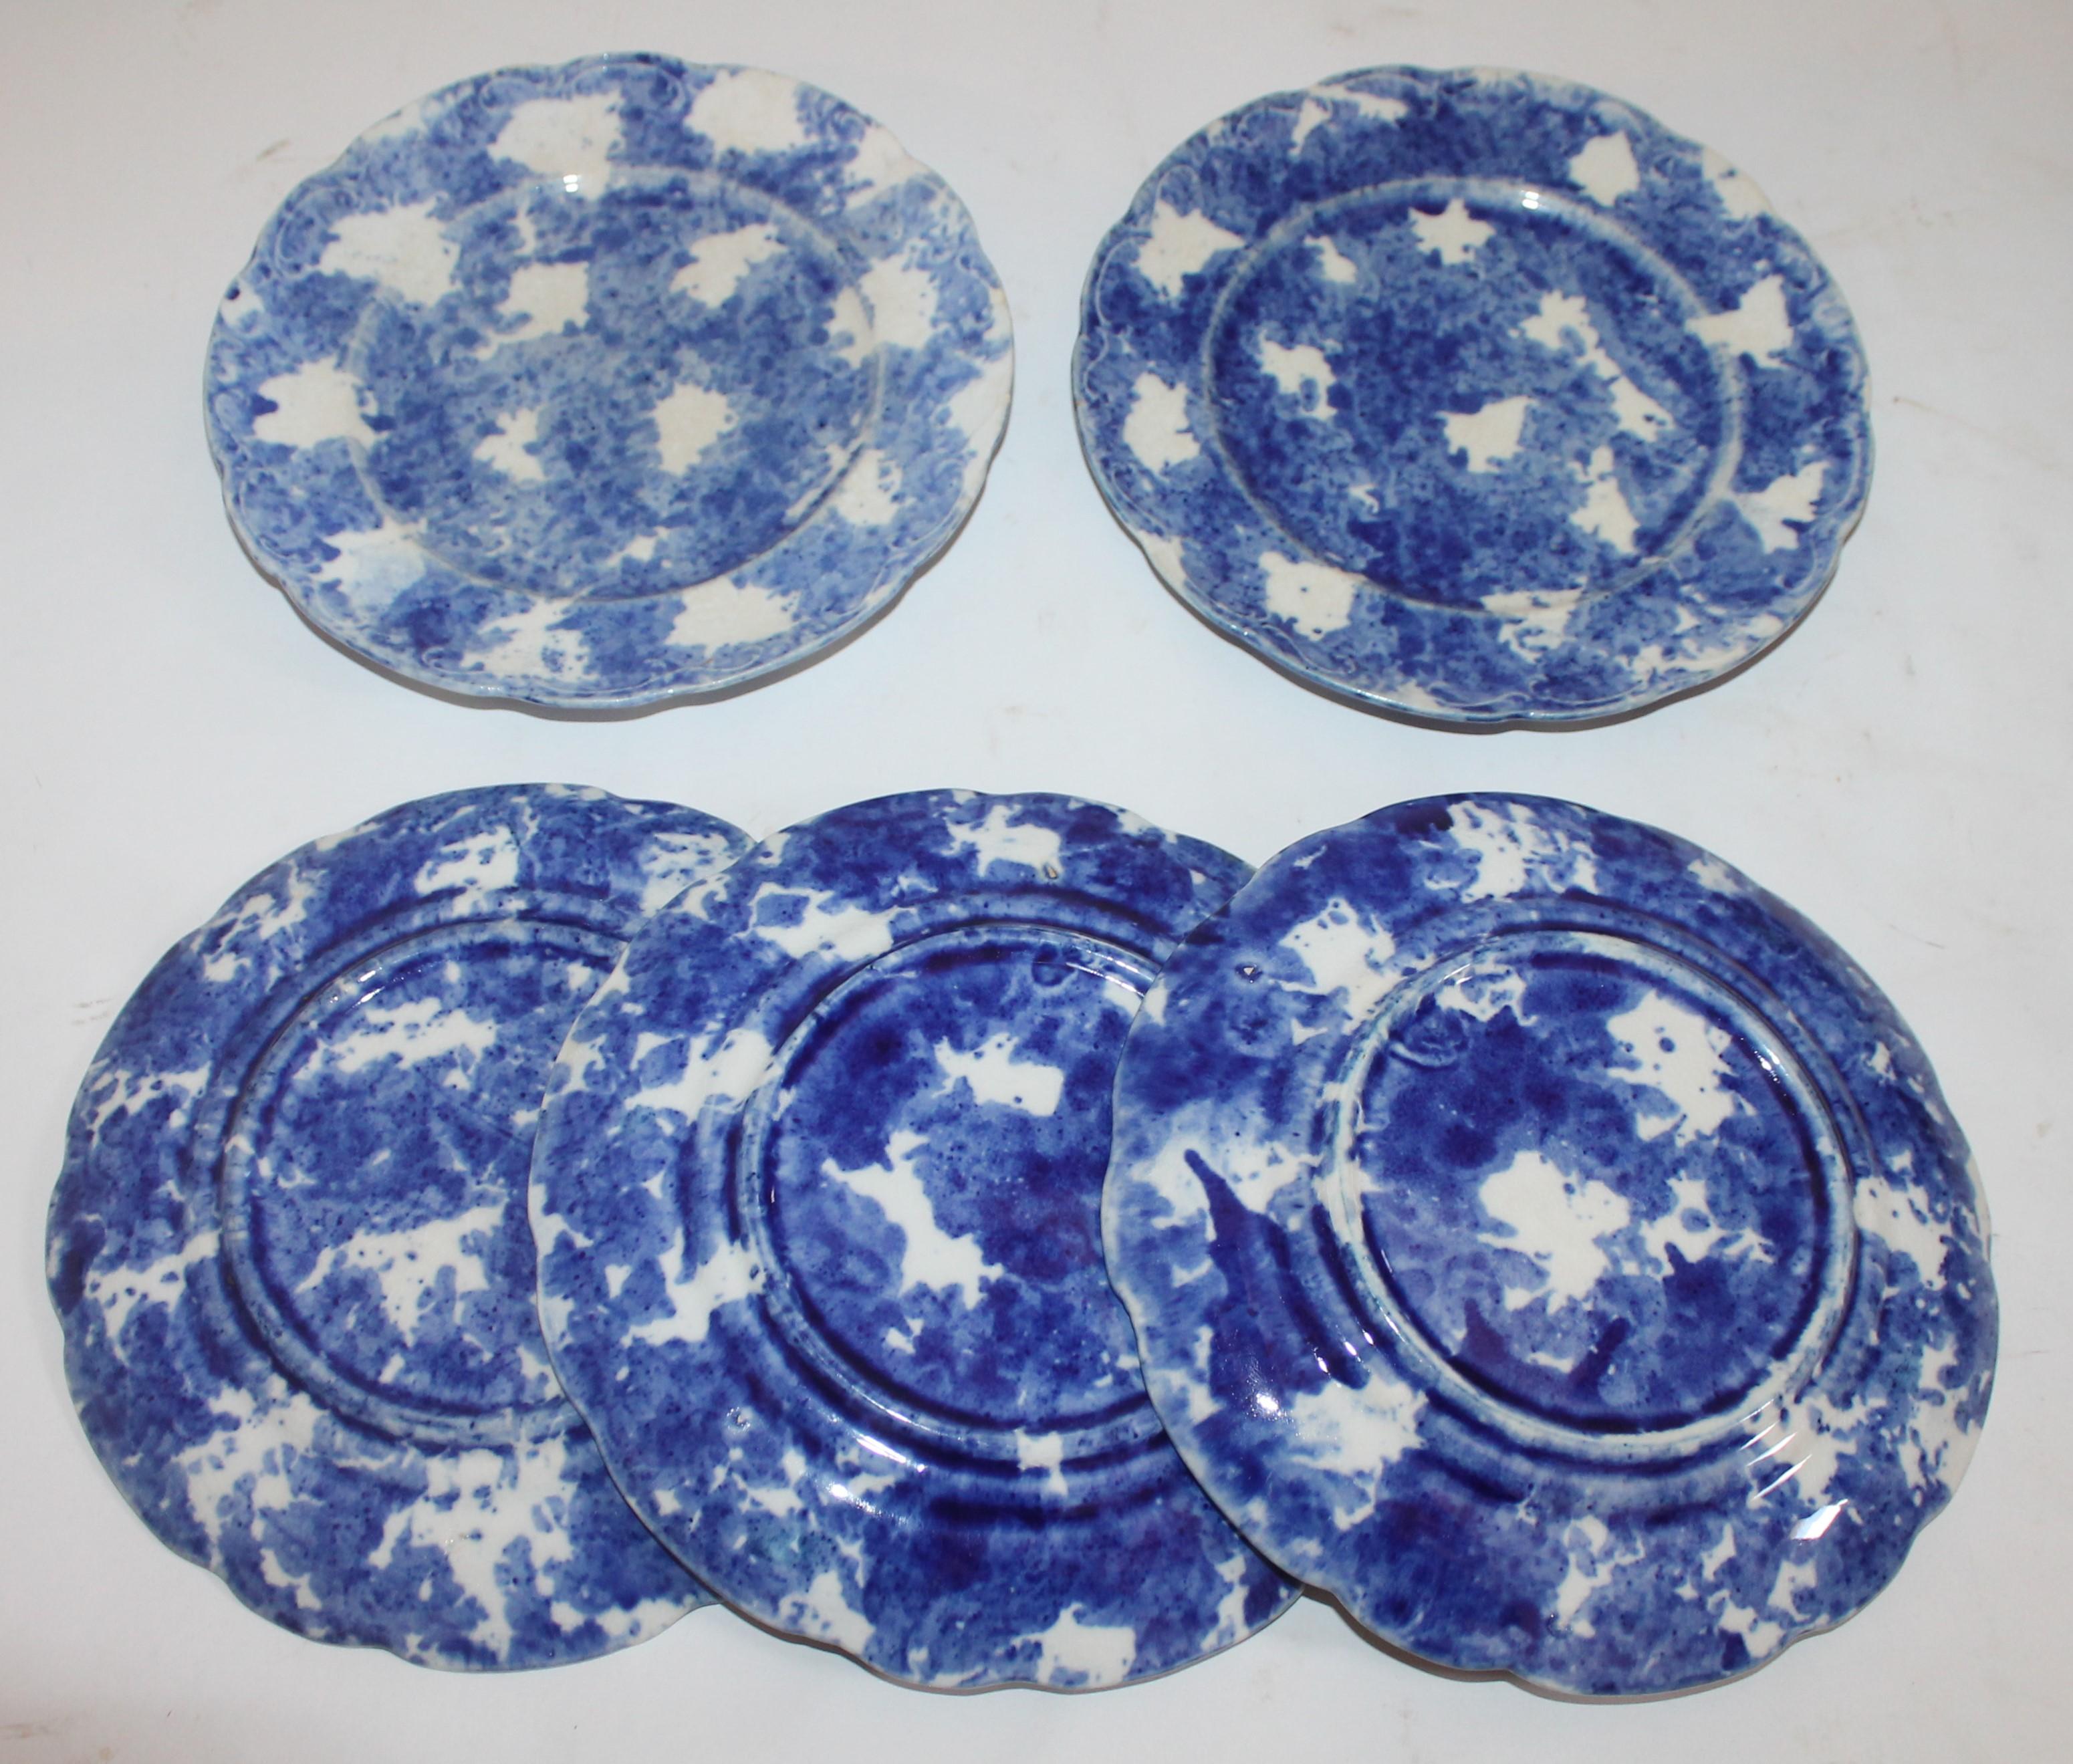 19th century sponge ware dining plates in pristine condition. Set of six plates.